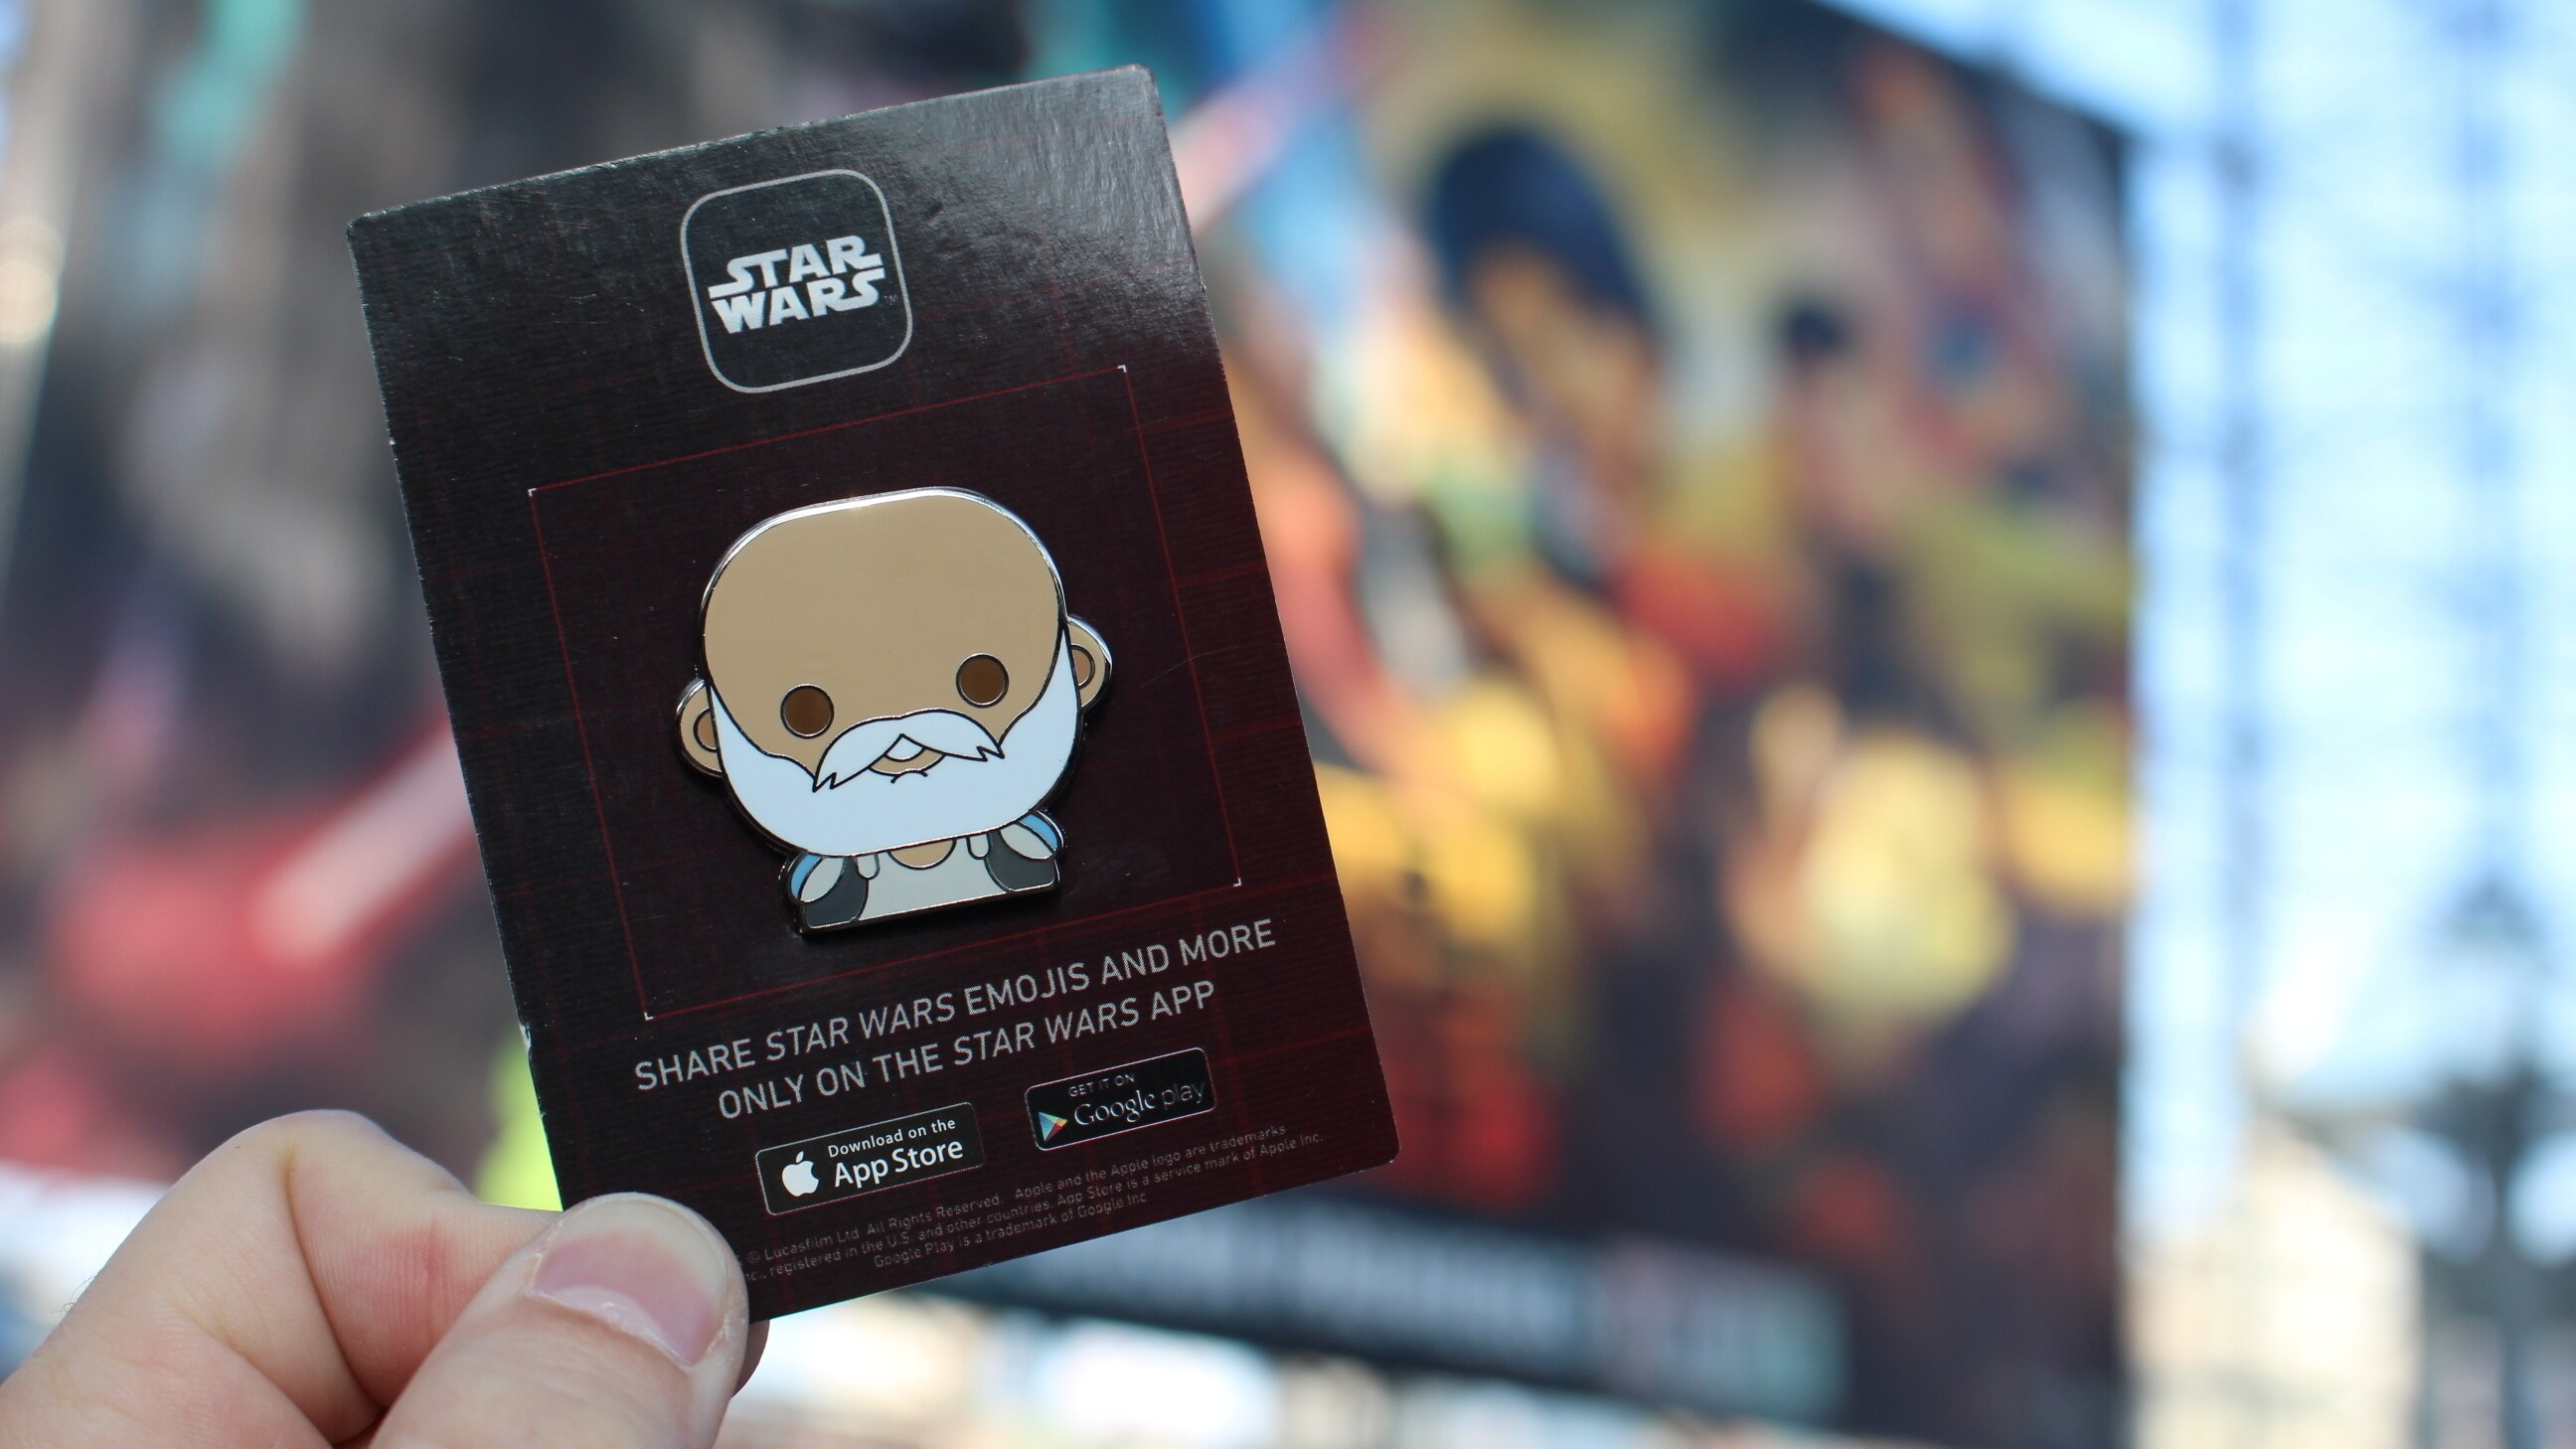 Star Wars Rebels Invades NYCC and the Star Wars App